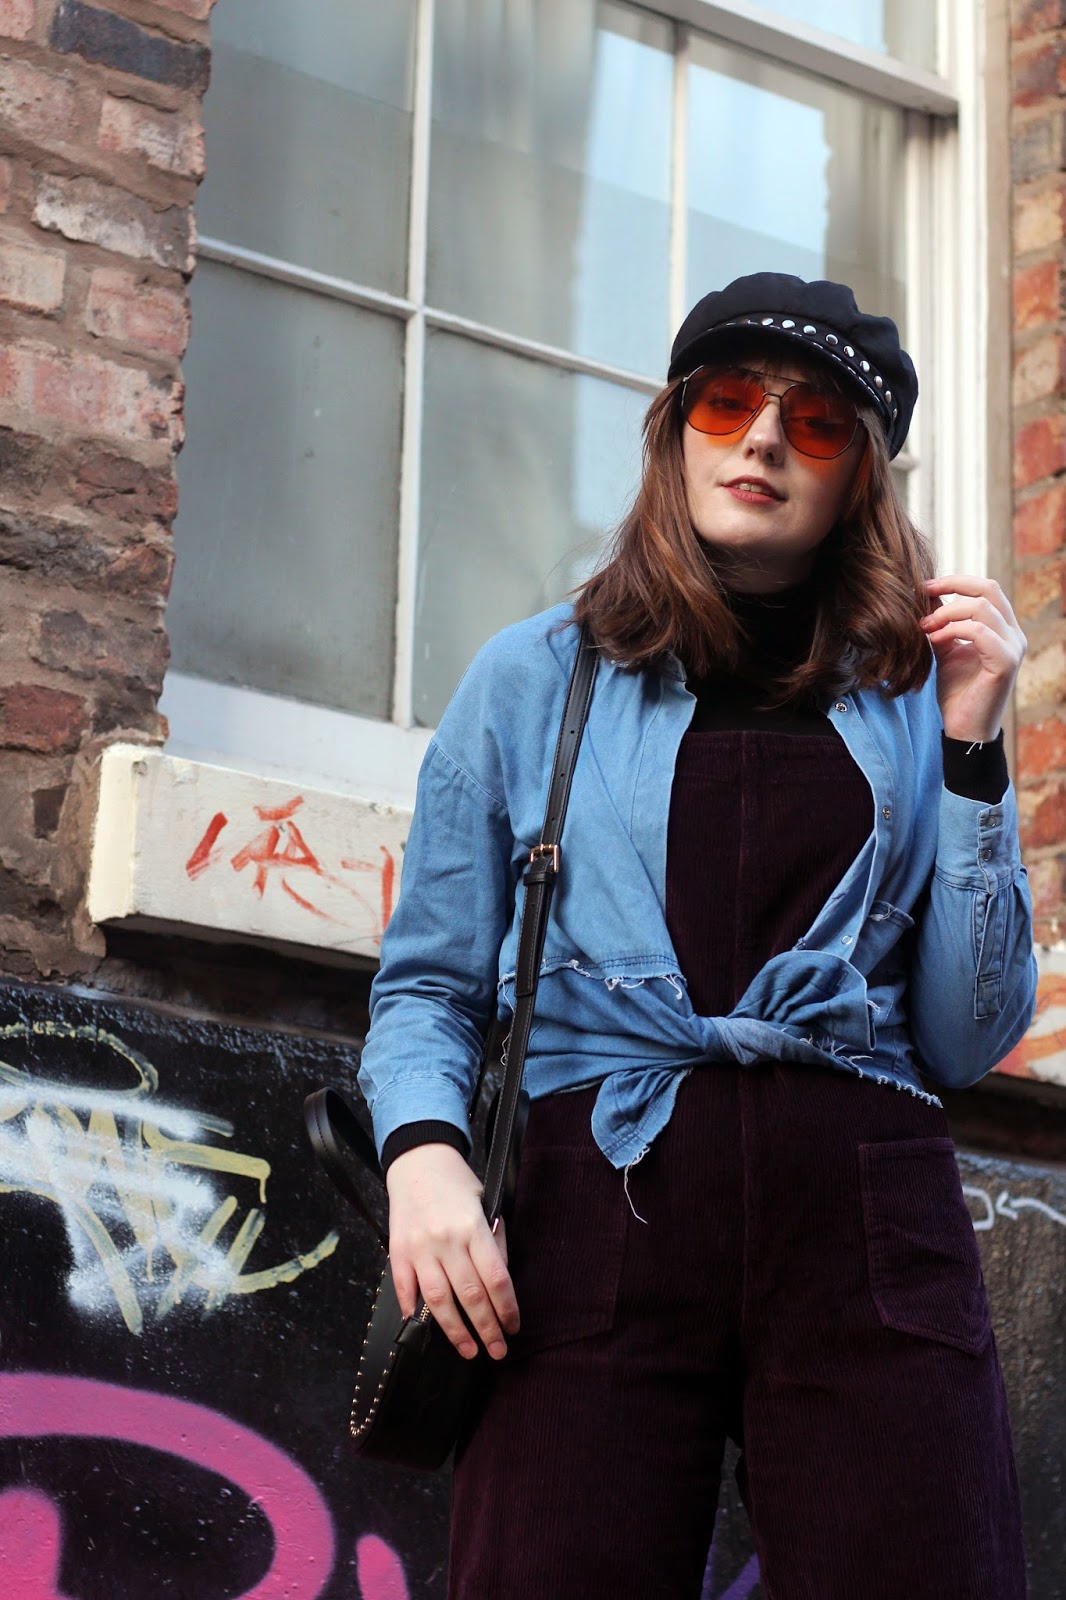 how to style dungarees seventies inspired, topshop baker boy hat, ASOS orange 70s sunglasses, denim shirt and cord dungarees with topshop black faux leather circle studded bag